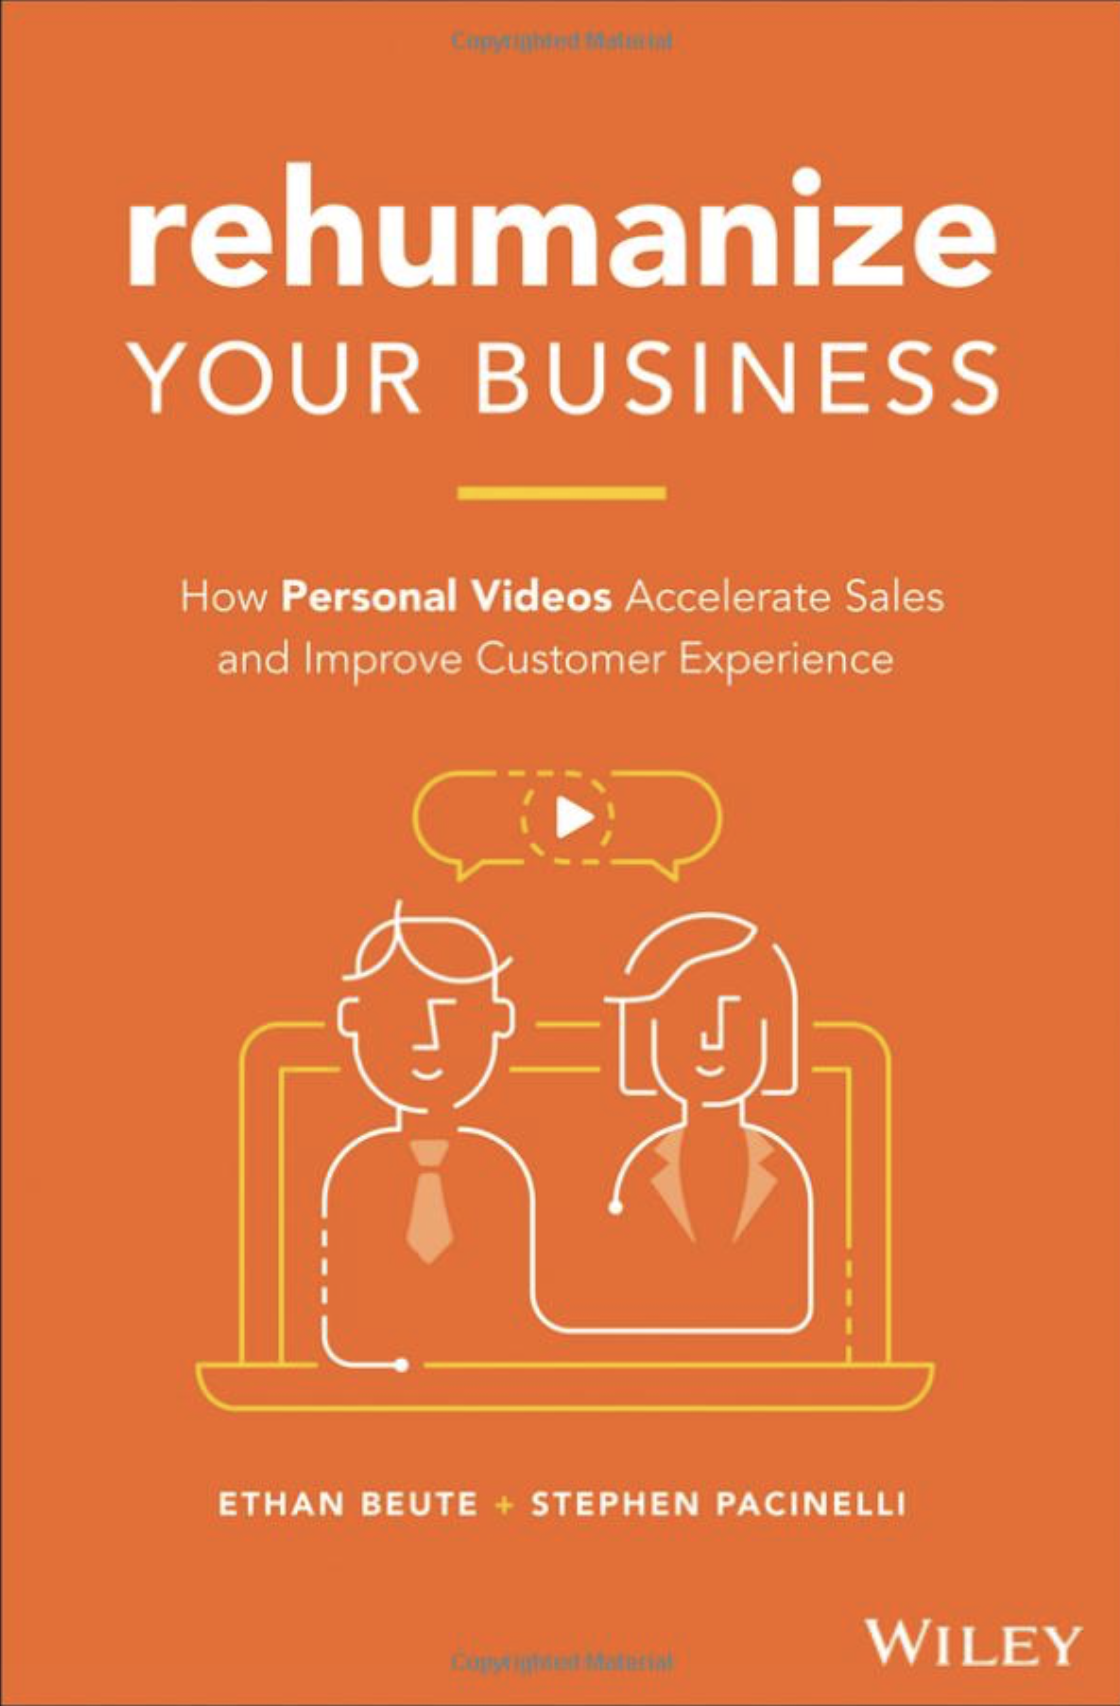 Book cover of "Rehumazing your business"